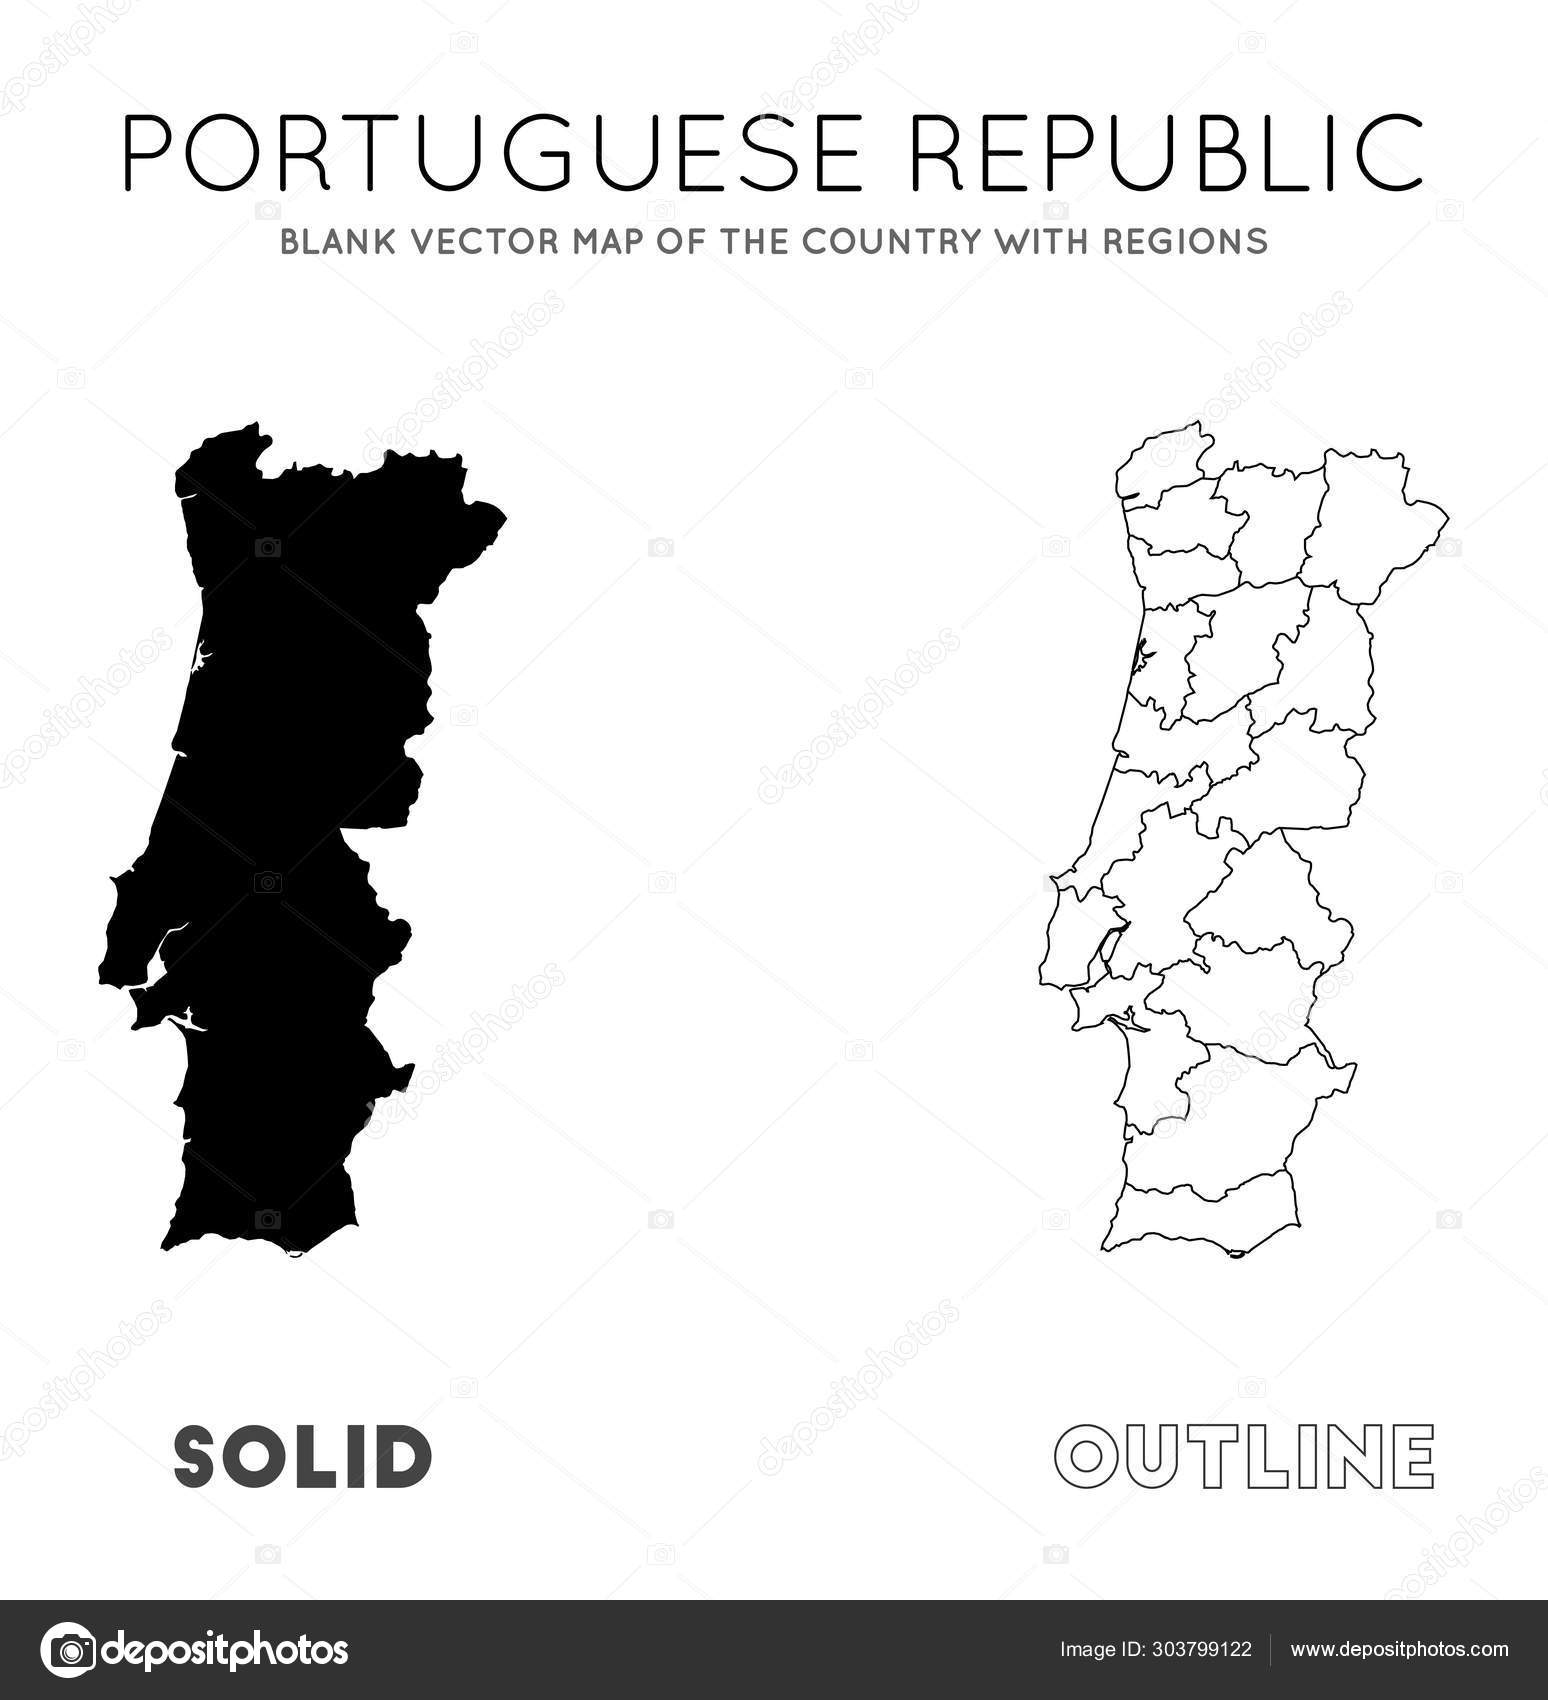 Districts Map of Portugal stock vector. Illustration of border